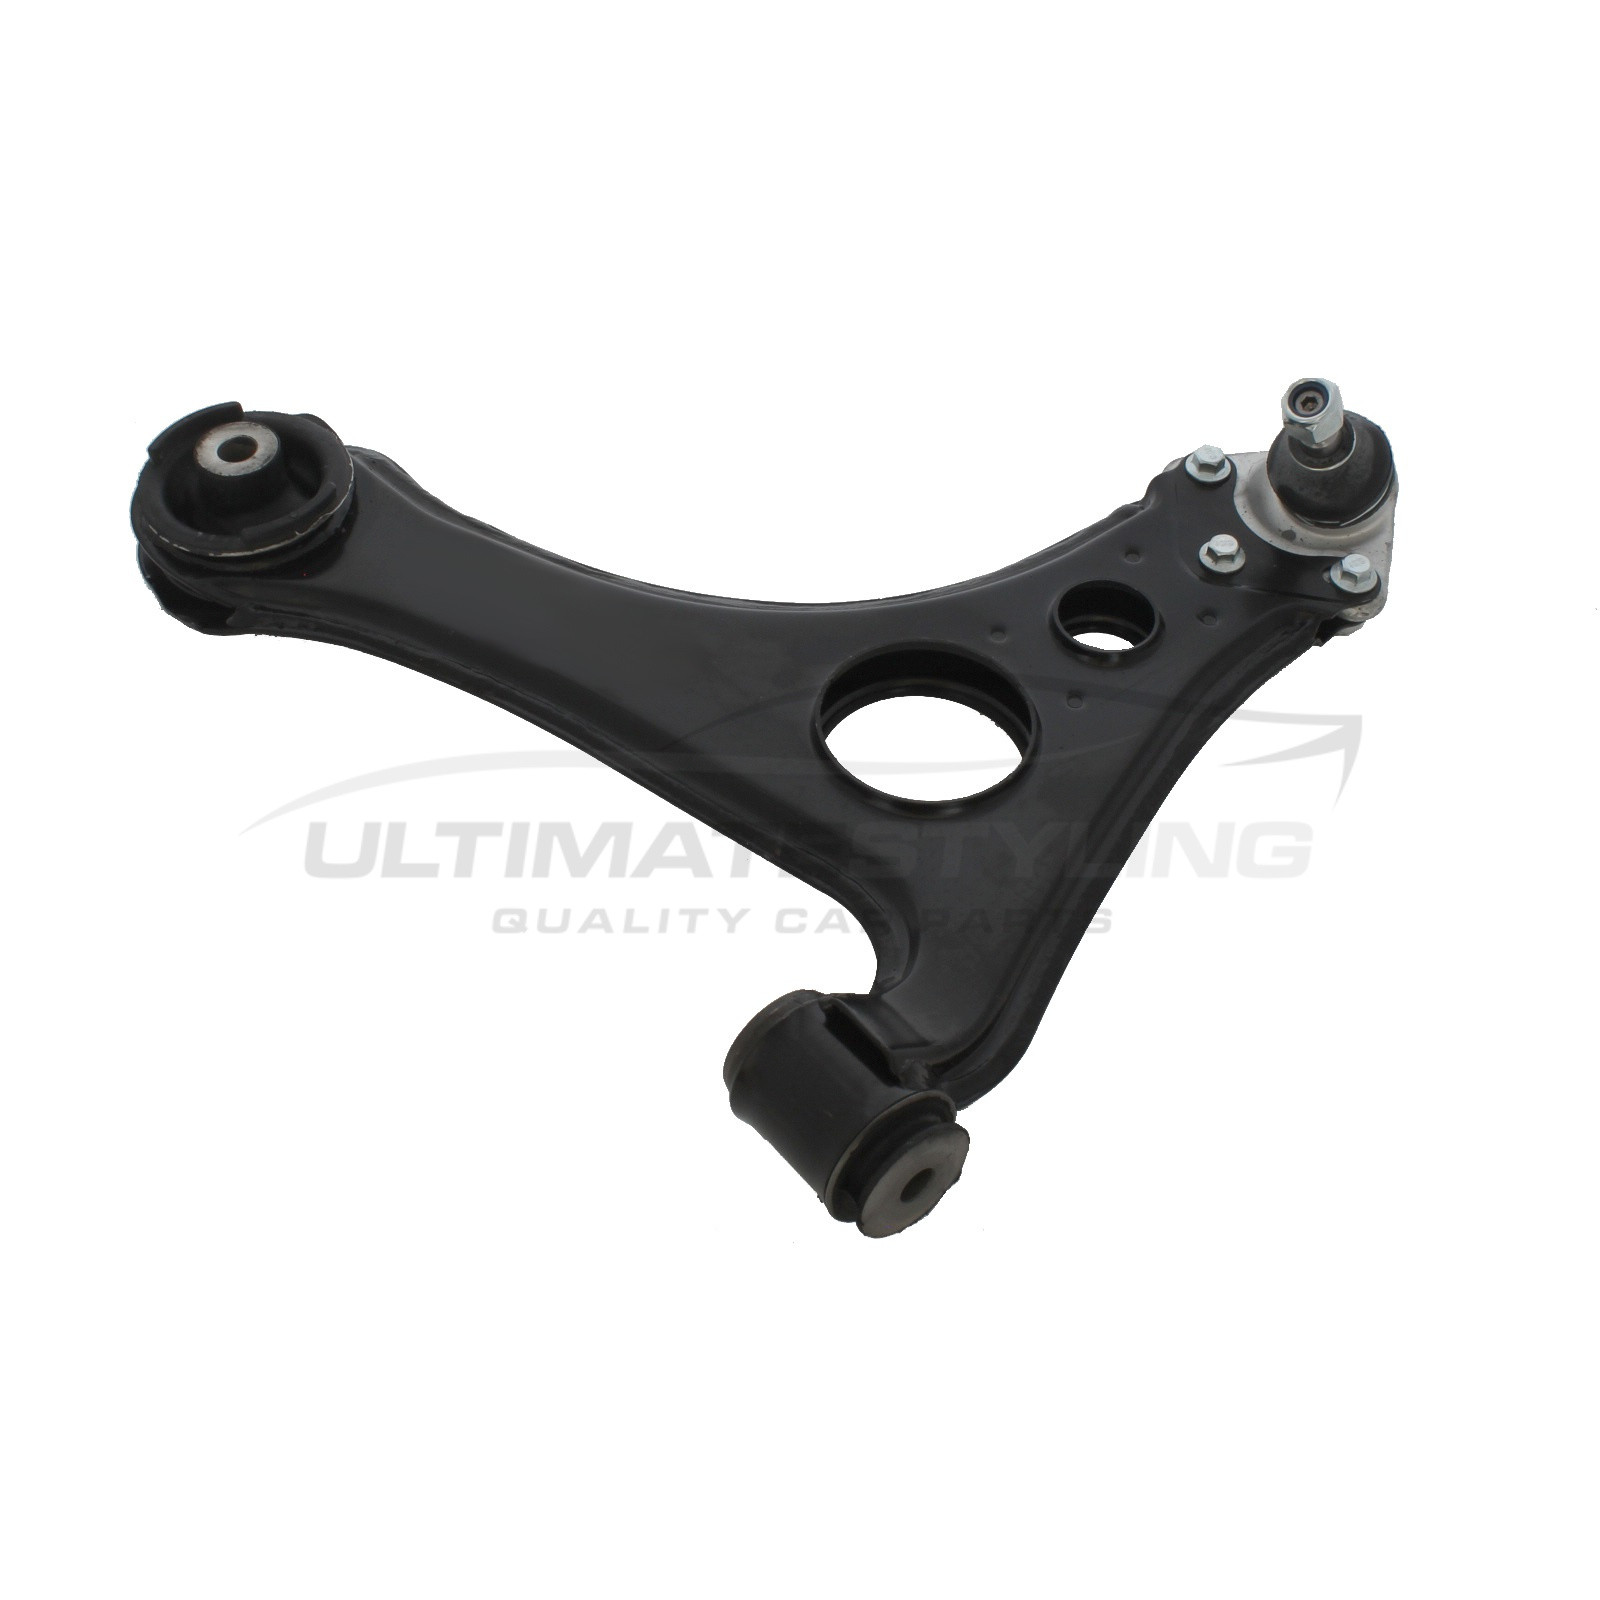 Mercedes Benz A Class 1998-2005 Front Lower Suspension Arm (Steel) Including Ball Joint and Rear Bush Driver Side (RH)